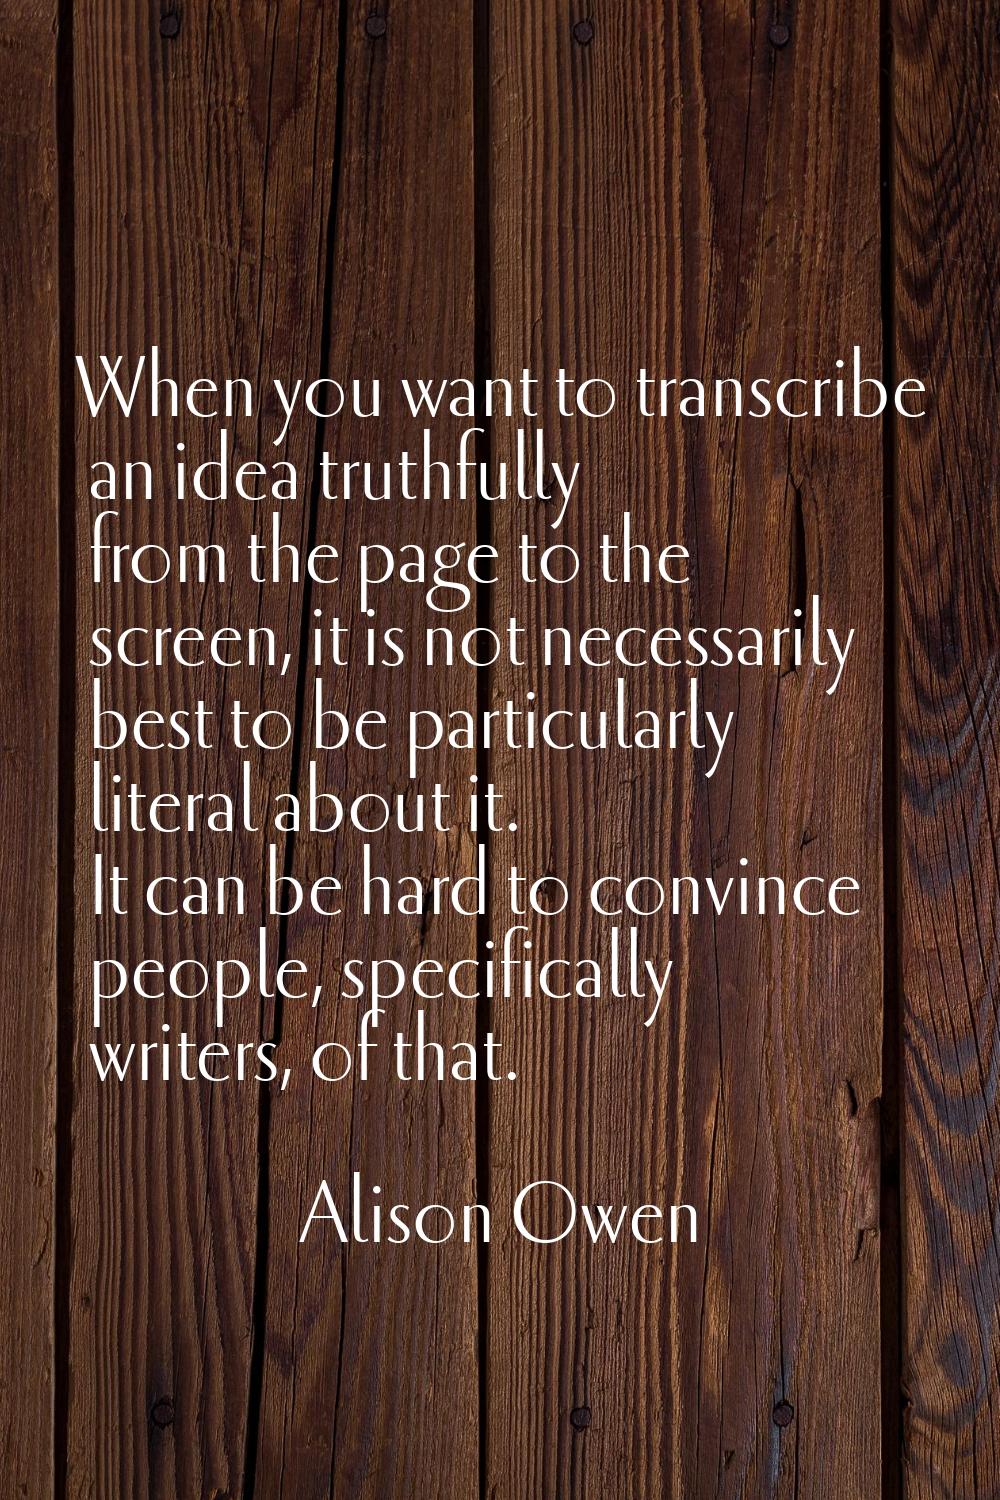 When you want to transcribe an idea truthfully from the page to the screen, it is not necessarily b